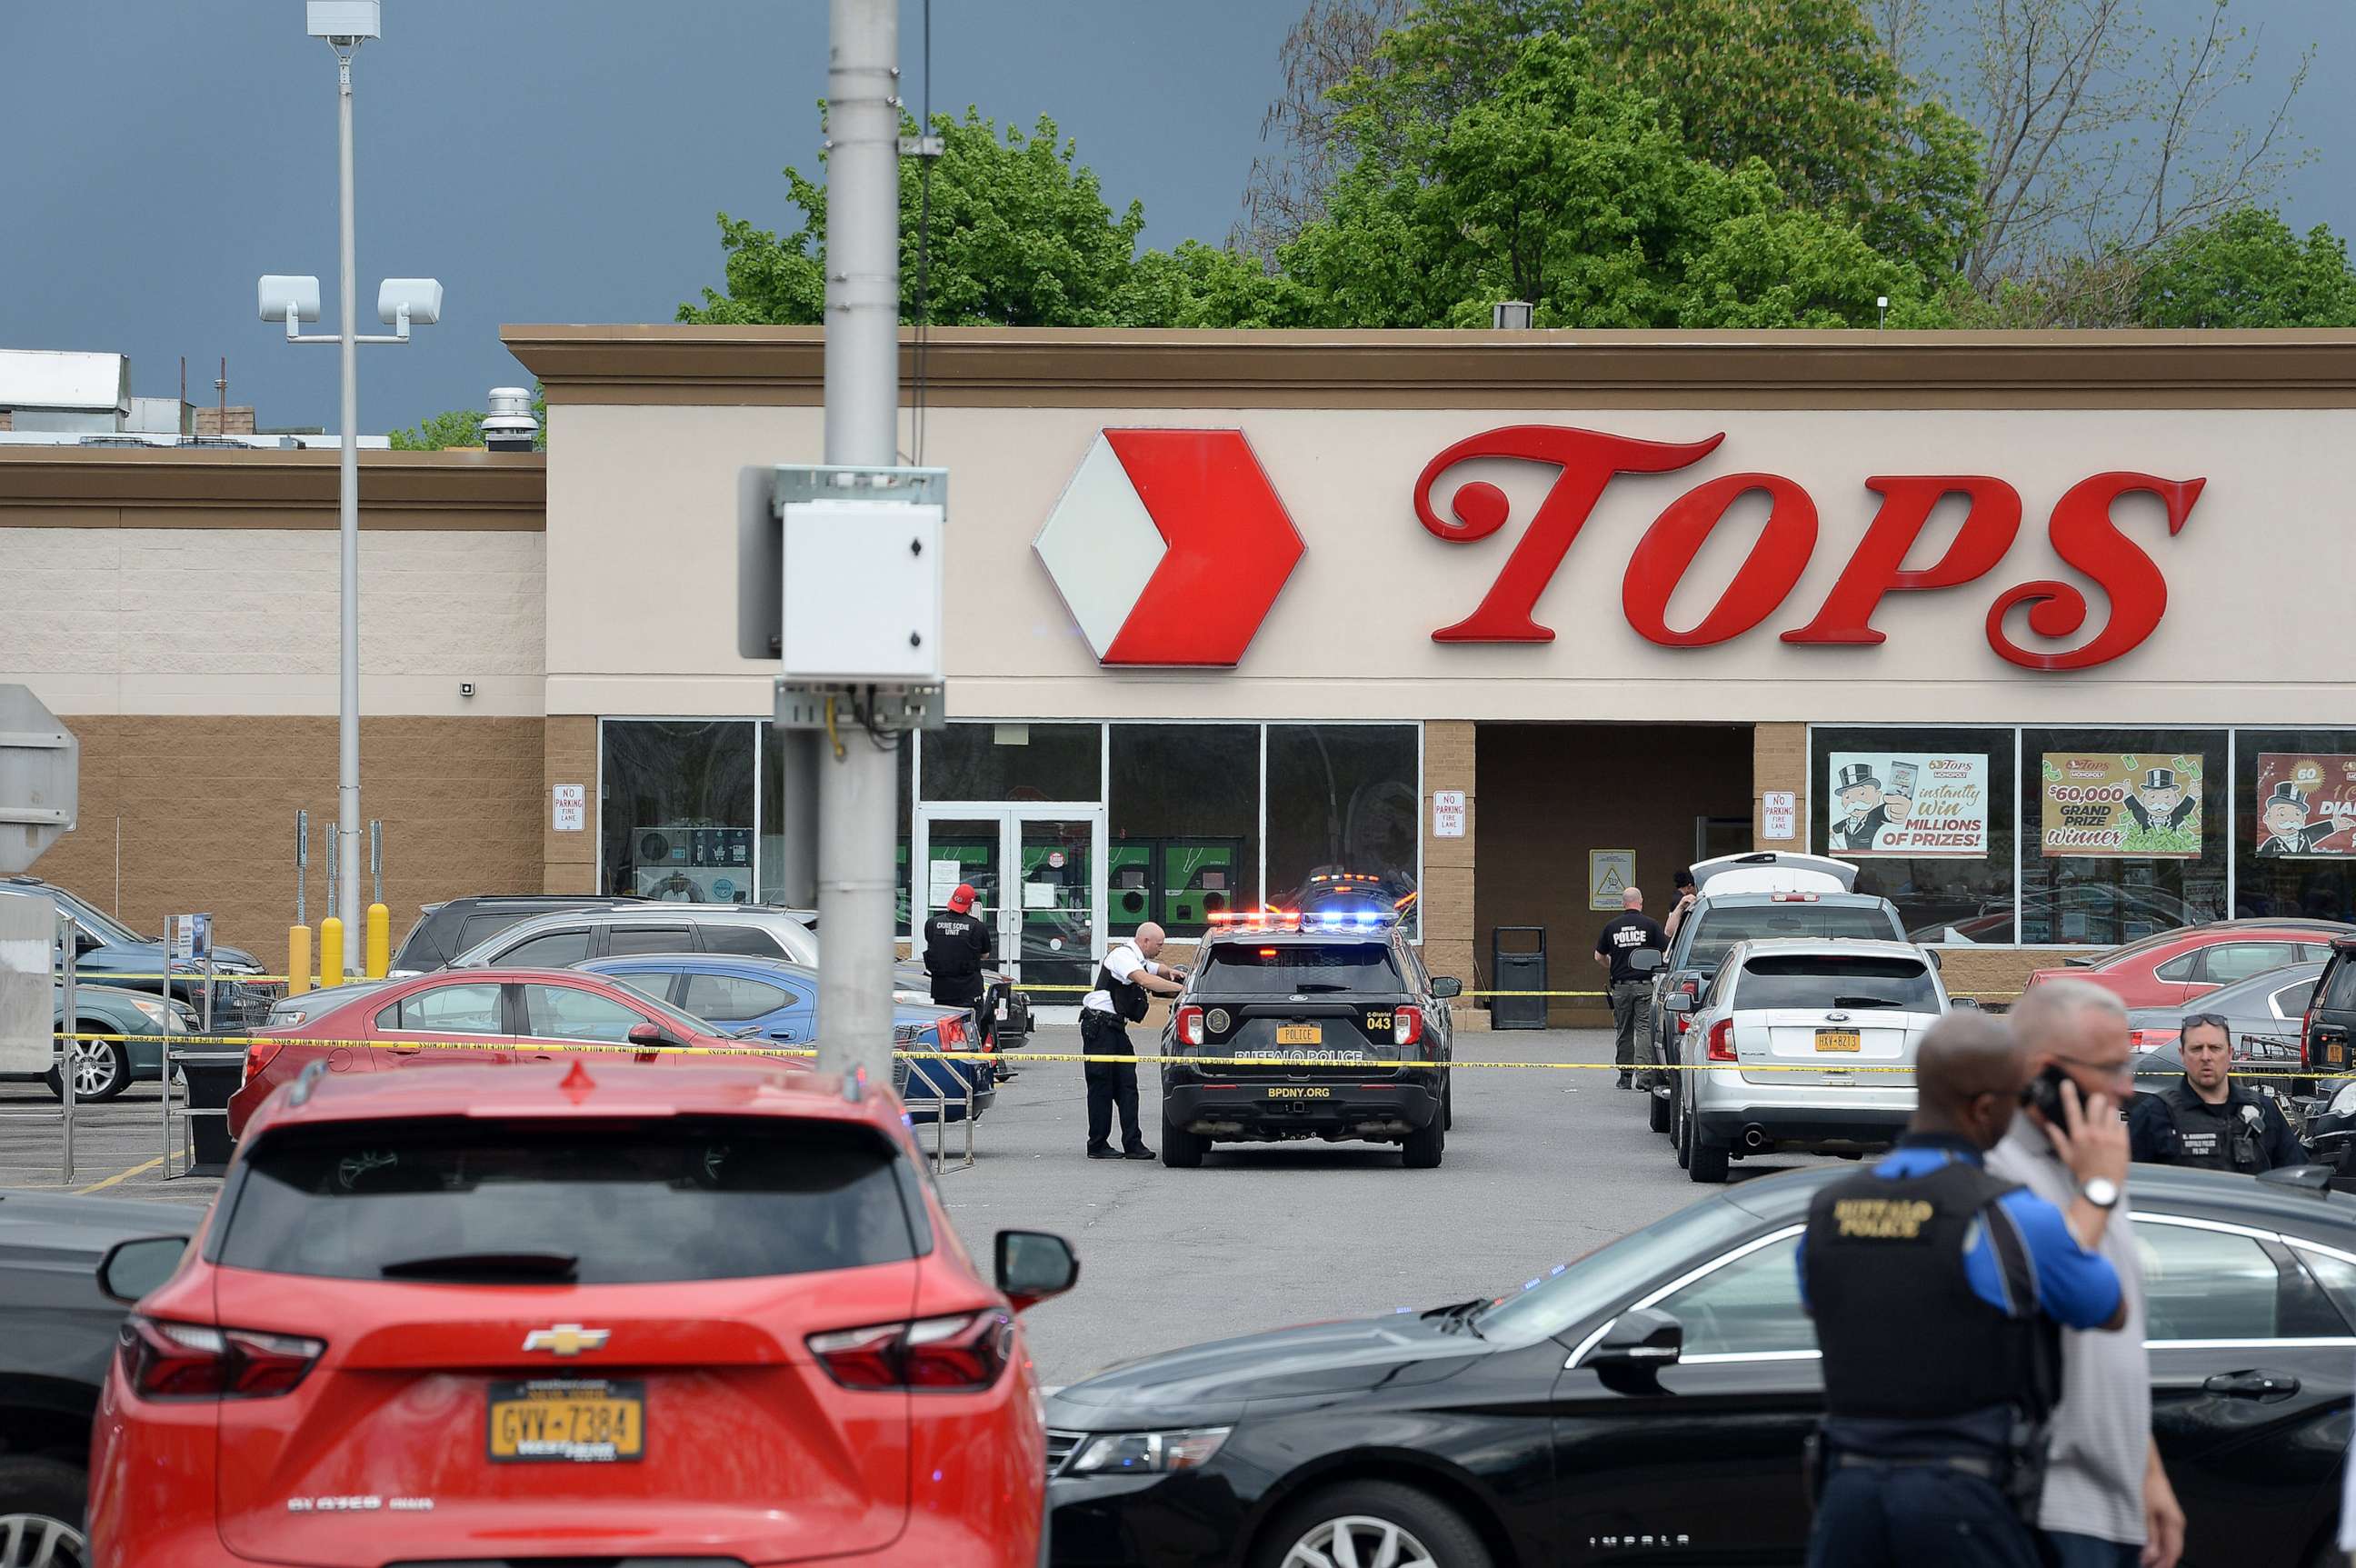 PHOTO: Buffalo police at the scene at Tops Friendly Market on May 14, 2022 in Buffalo, N.Y., after a mass shooting.